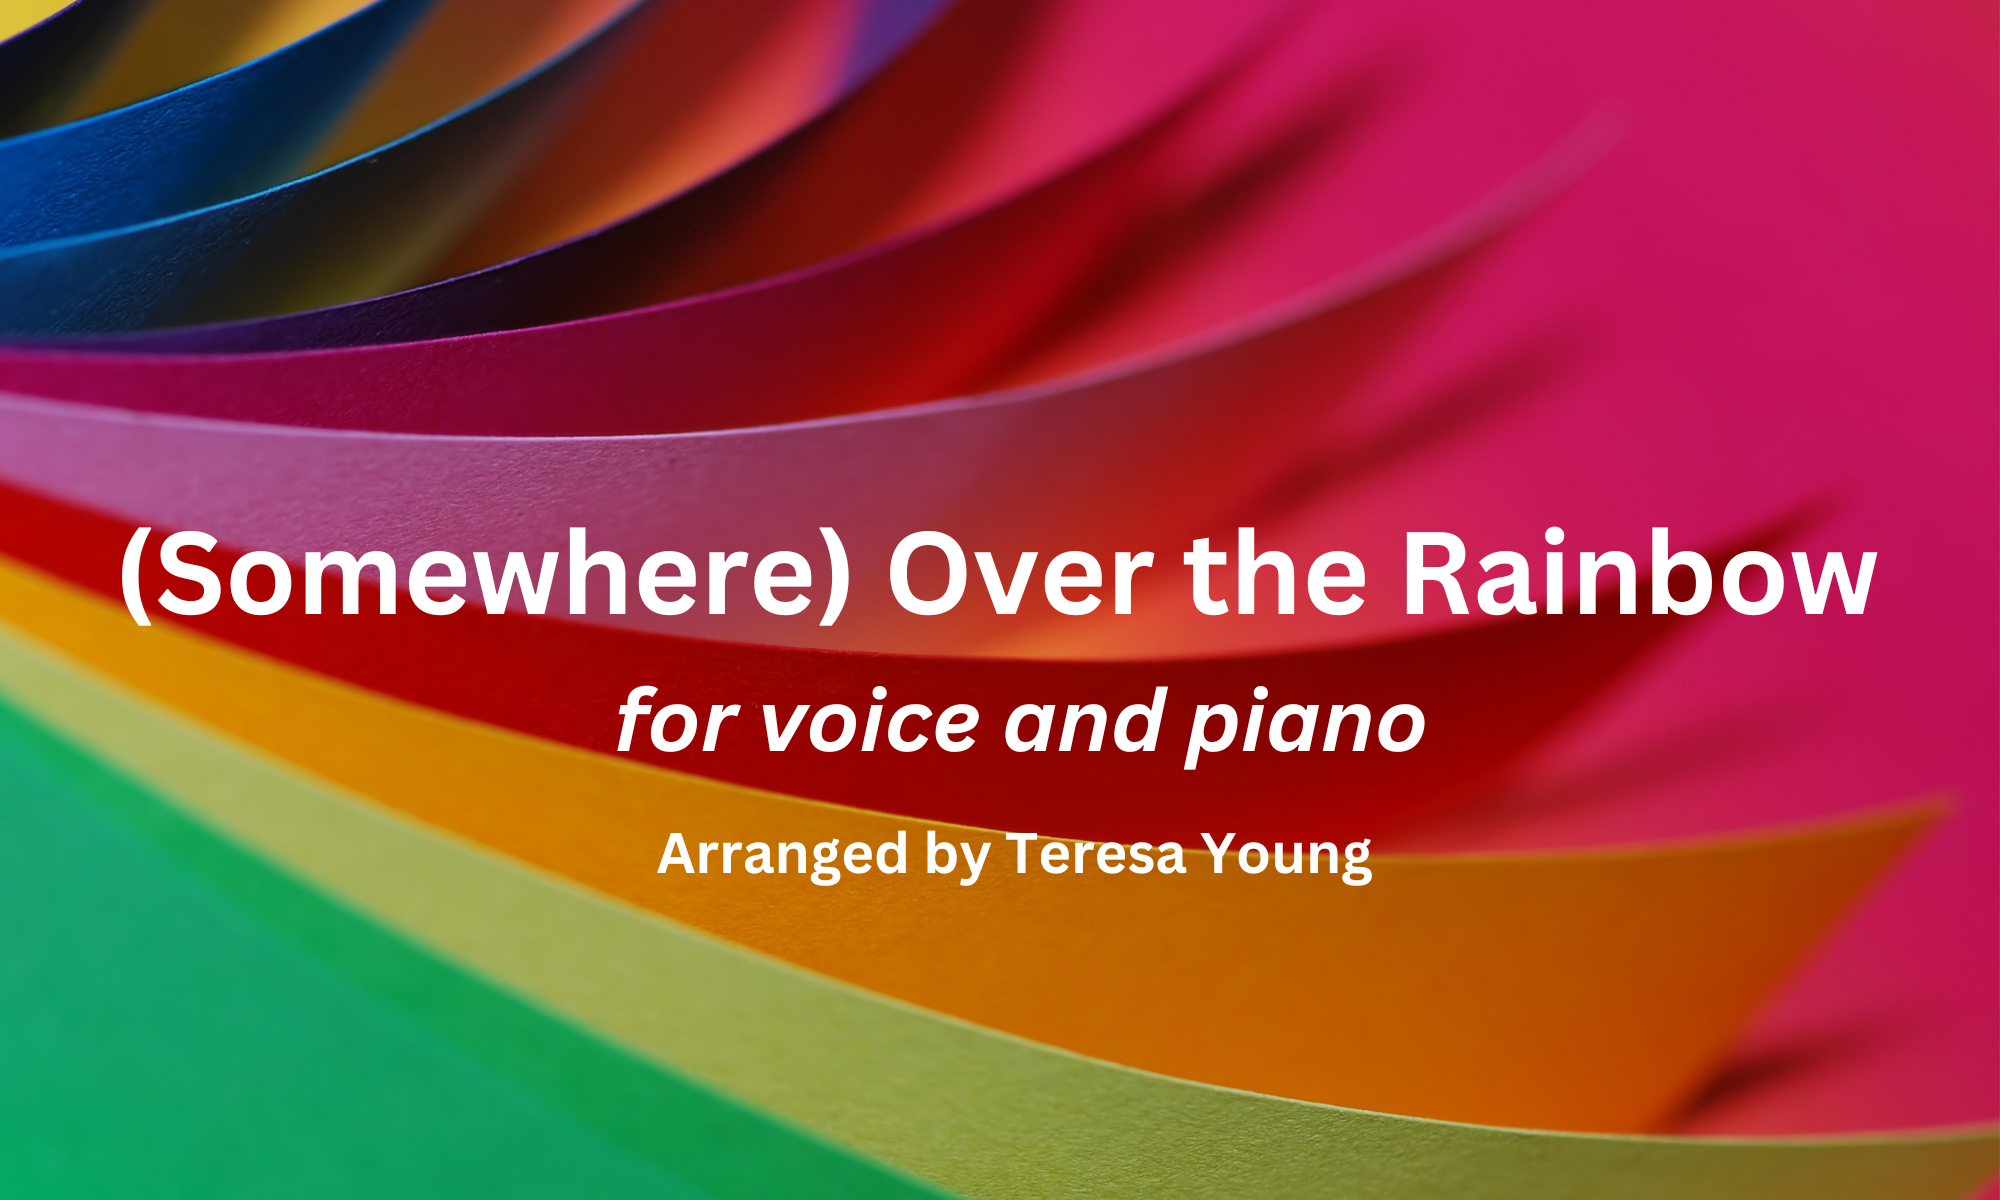 Over the Rainbow, for voice and piano, arr. Teresa Young